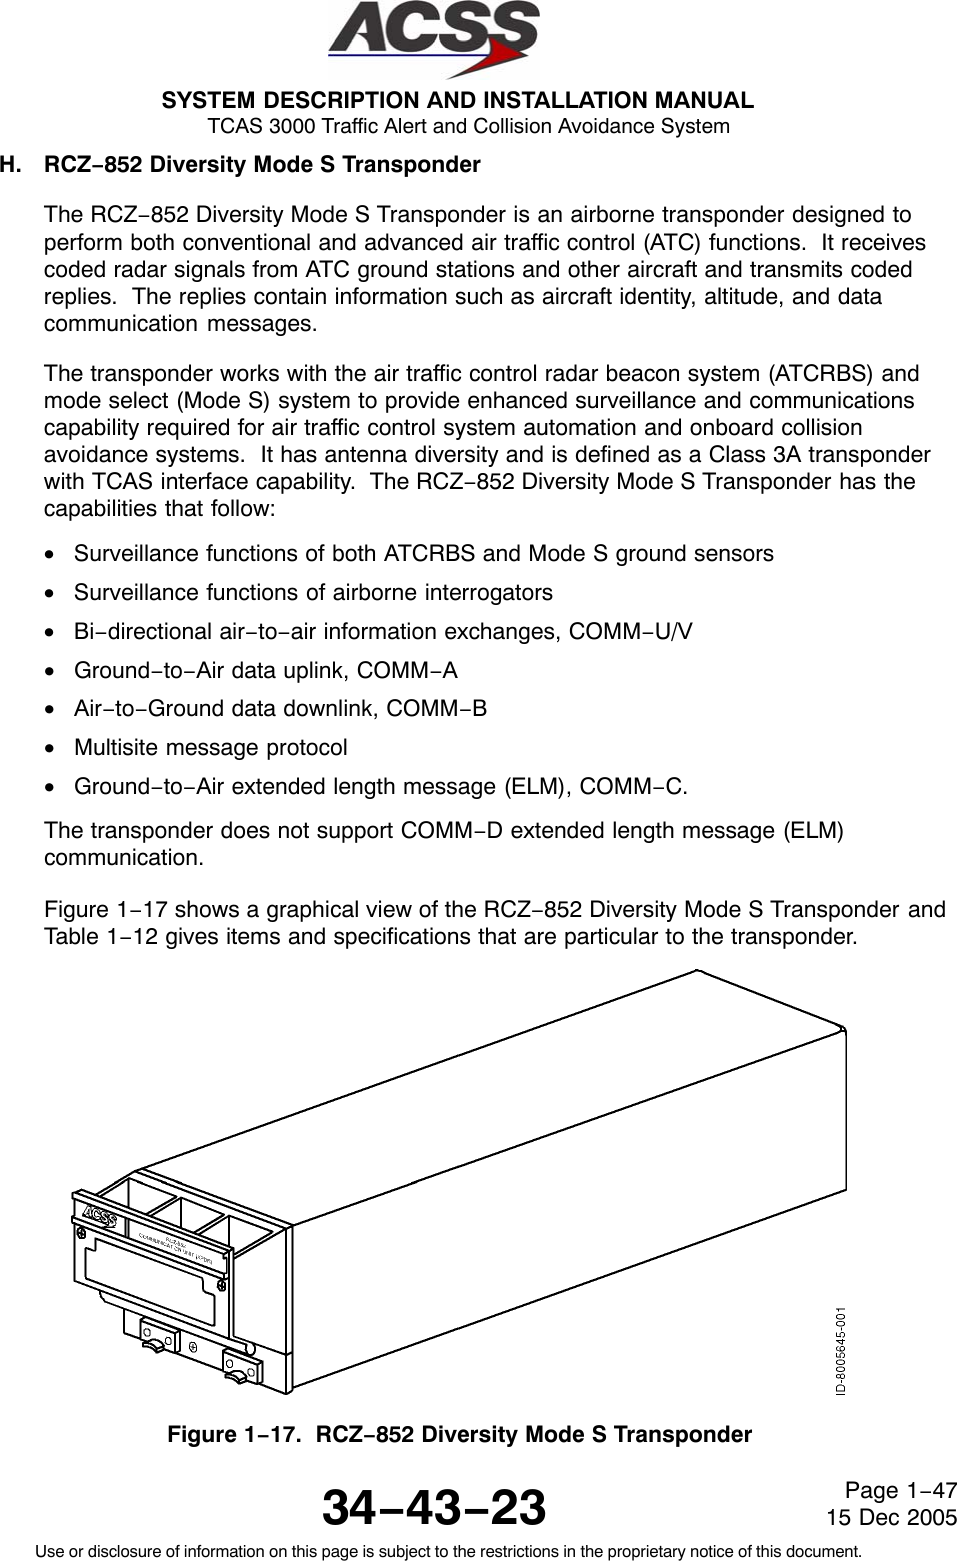 SYSTEM DESCRIPTION AND INSTALLATION MANUAL TCAS 3000 Traffic Alert and Collision Avoidance System34−43−23Use or disclosure of information on this page is subject to the restrictions in the proprietary notice of this document.Page 1−4715 Dec 2005H. RCZ−852 Diversity Mode S TransponderThe RCZ−852 Diversity Mode S Transponder is an airborne transponder designed toperform both conventional and advanced air traffic control (ATC) functions.  It receivescoded radar signals from ATC ground stations and other aircraft and transmits codedreplies.  The replies contain information such as aircraft identity, altitude, and datacommunication messages.The transponder works with the air traffic control radar beacon system (ATCRBS) andmode select (Mode S) system to provide enhanced surveillance and communicationscapability required for air traffic control system automation and onboard collisionavoidance systems.  It has antenna diversity and is defined as a Class 3A transponderwith TCAS interface capability.  The RCZ−852 Diversity Mode S Transponder has thecapabilities that follow:•Surveillance functions of both ATCRBS and Mode S ground sensors•Surveillance functions of airborne interrogators•Bi−directional air−to−air information exchanges, COMM−U/V•Ground−to−Air data uplink, COMM−A•Air−to−Ground data downlink, COMM−B•Multisite message protocol•Ground−to−Air extended length message (ELM), COMM−C.The transponder does not support COMM−D extended length message (ELM)communication.Figure 1−17 shows a graphical view of the RCZ−852 Diversity Mode S Transponder andTable 1−12 gives items and specifications that are particular to the transponder.Figure 1−17.  RCZ−852 Diversity Mode S Transponder